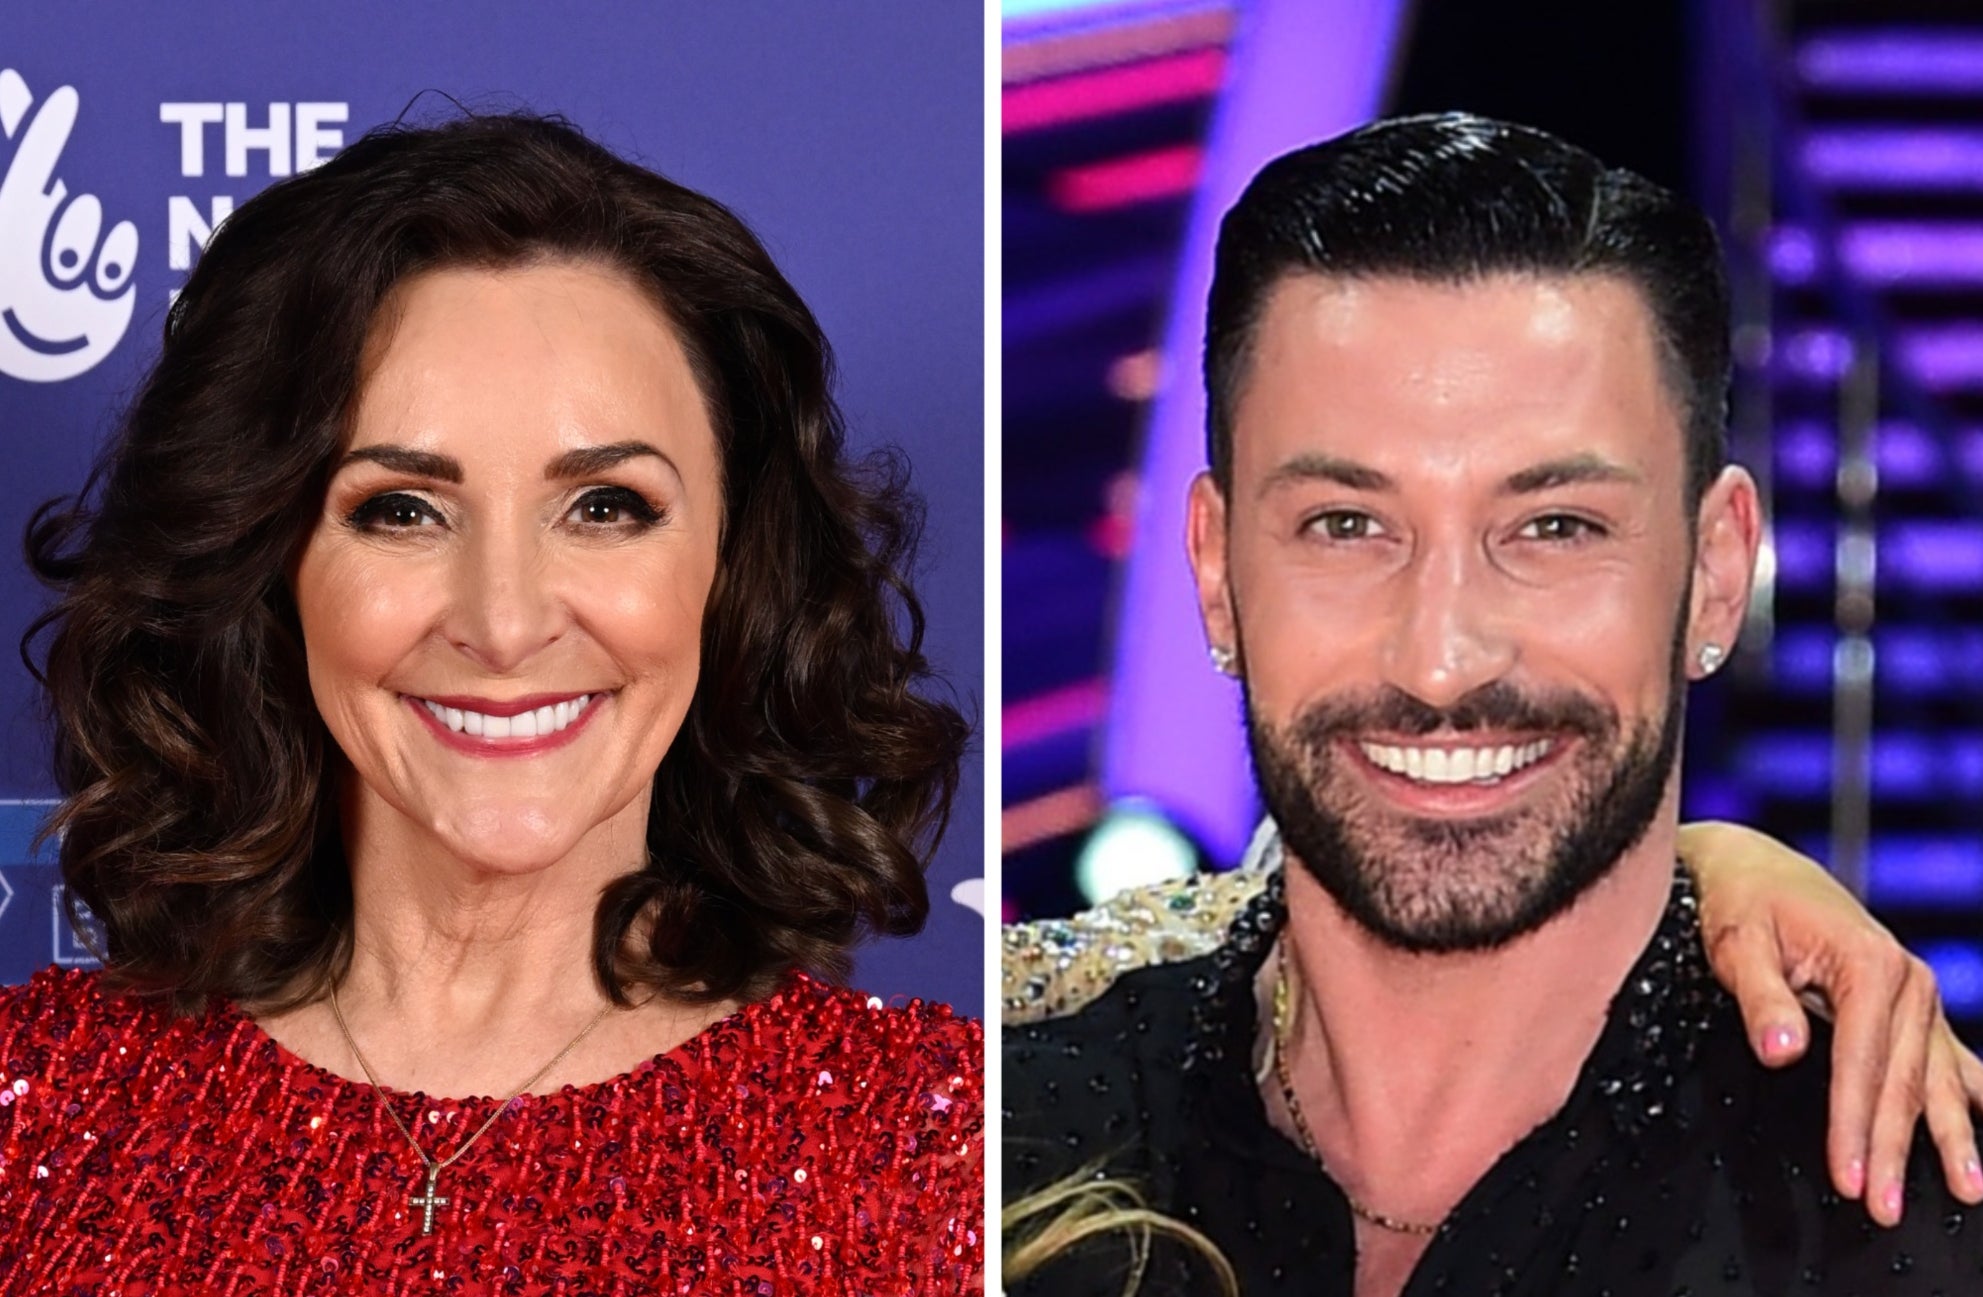 Judge Shirley Ballas has shown support for Pernice following allegations